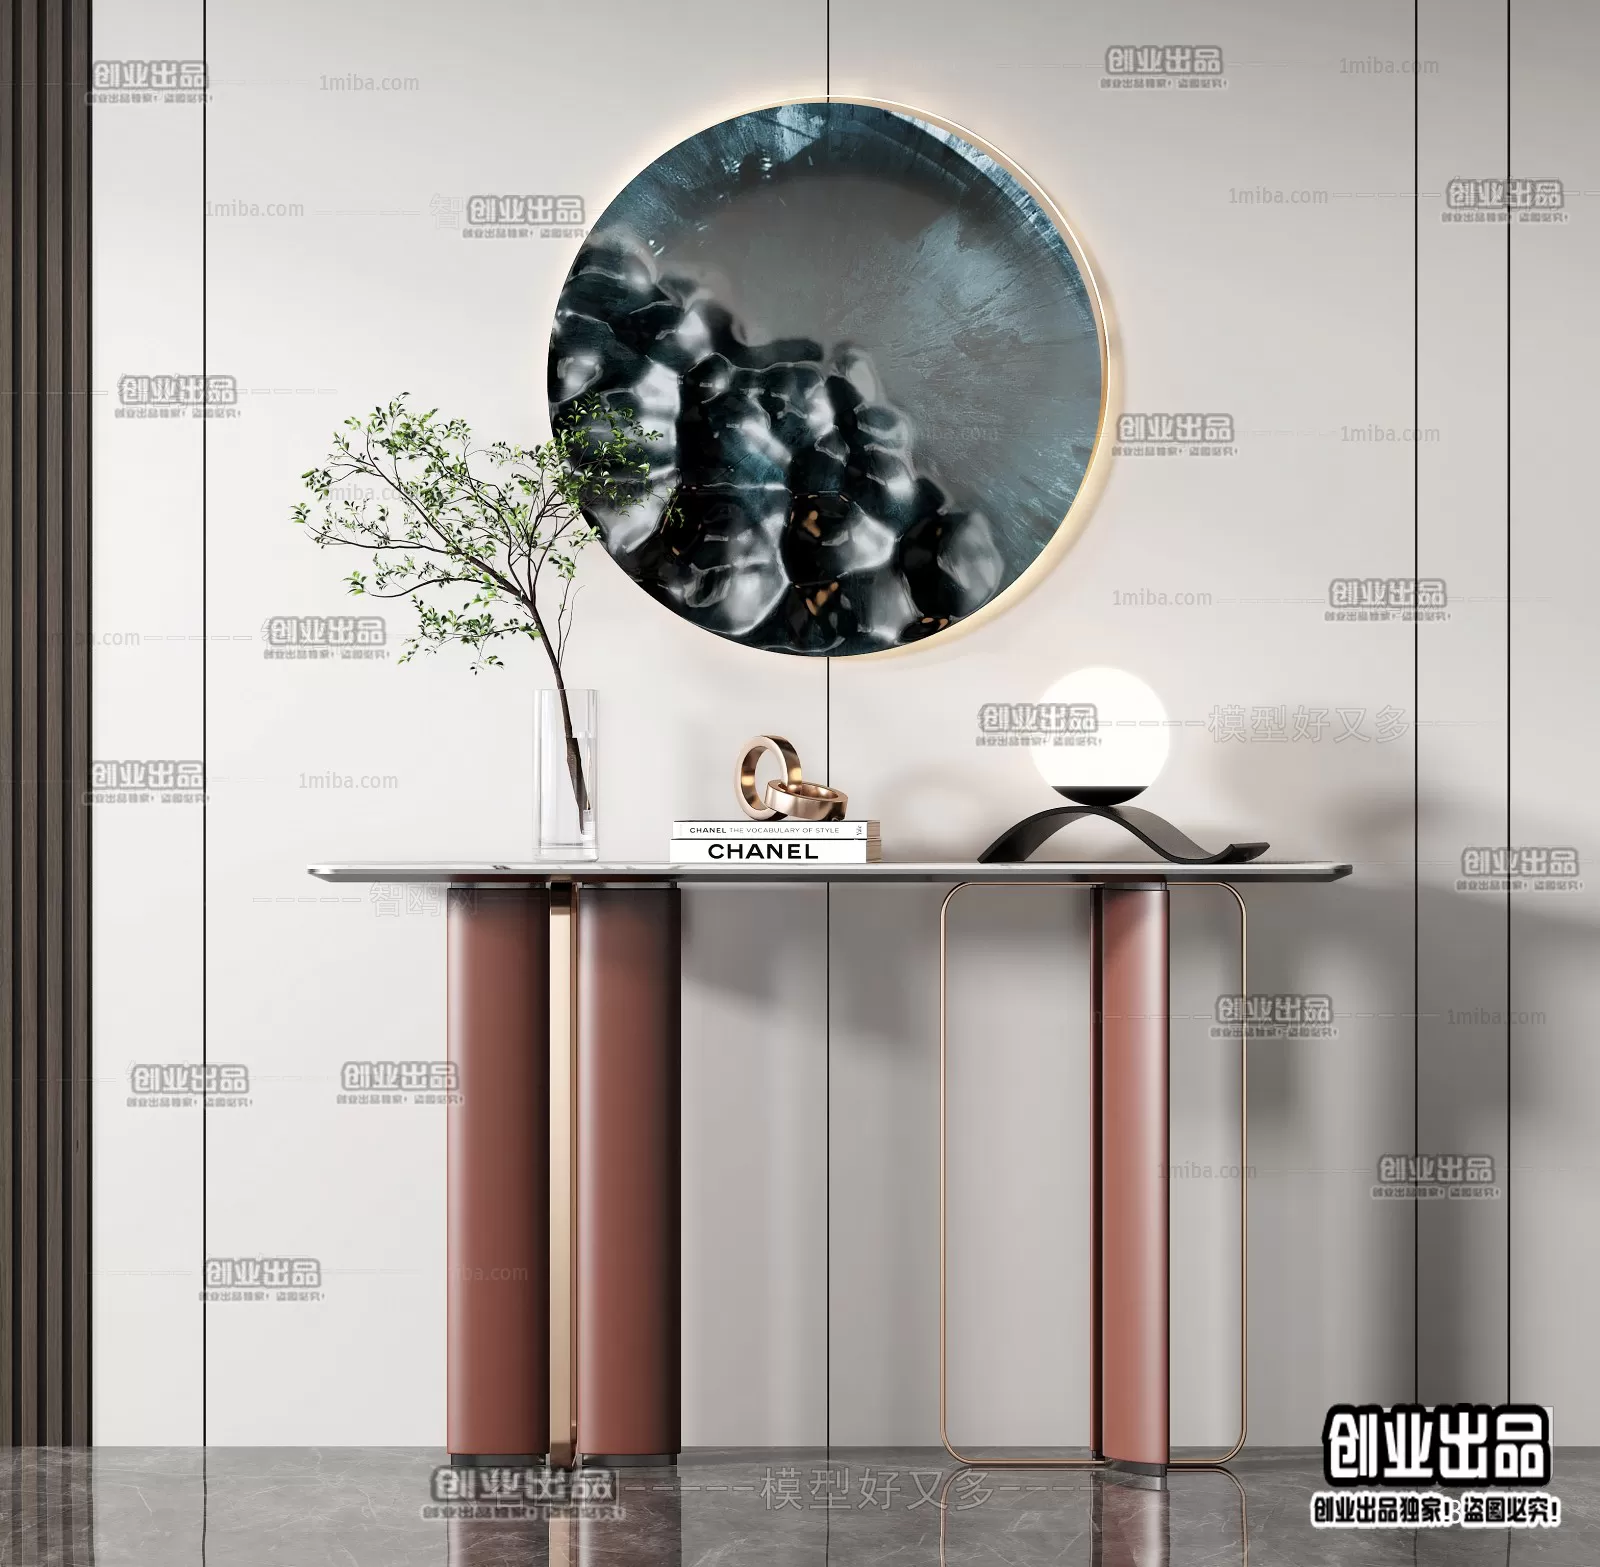 CONSOLE TABLE – 5 – FURNITURE 3D MODELS 2022 (VRAY)